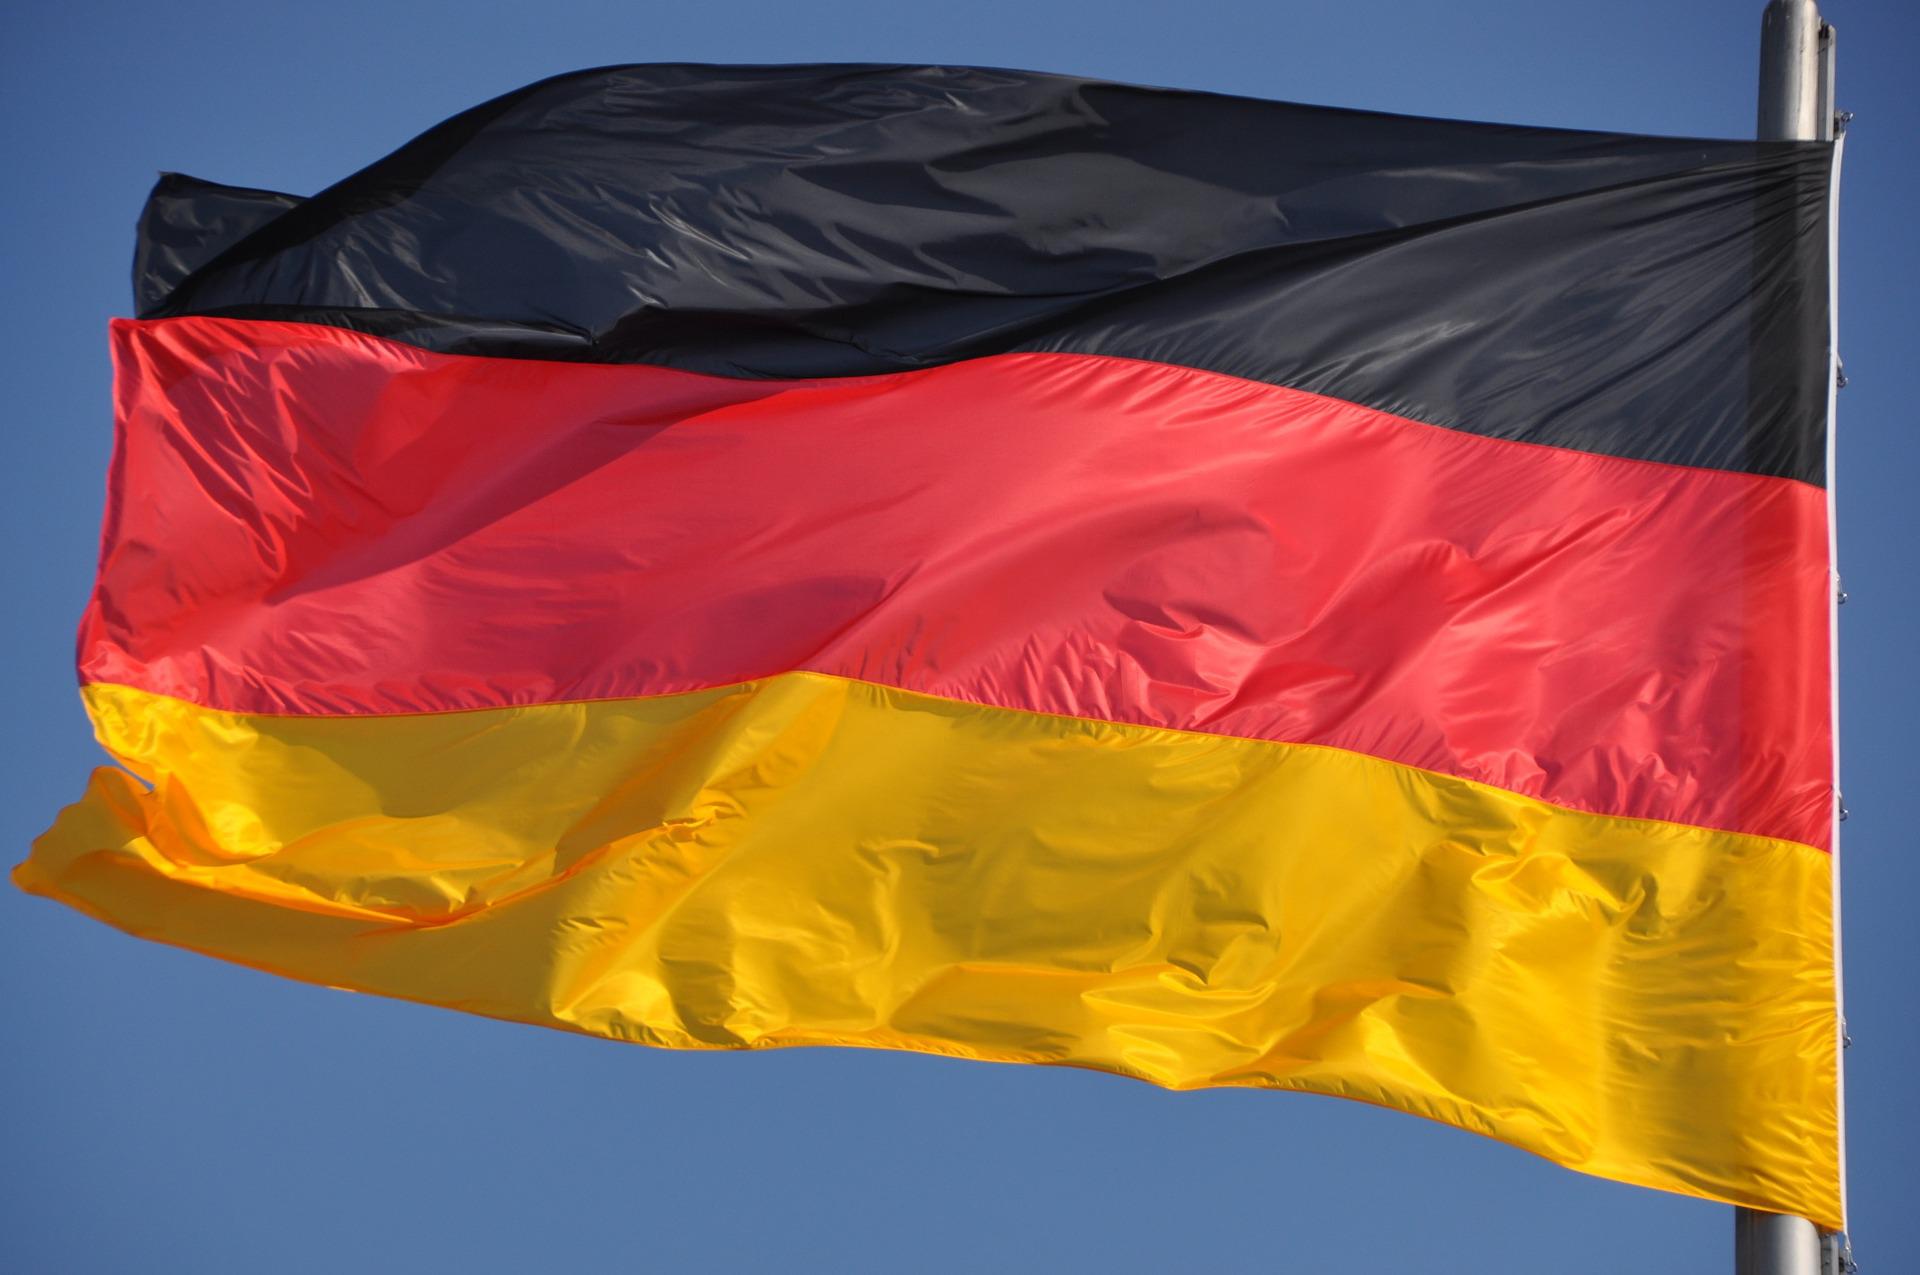 Aubrey Global Emerging Markets fund now available in Germany